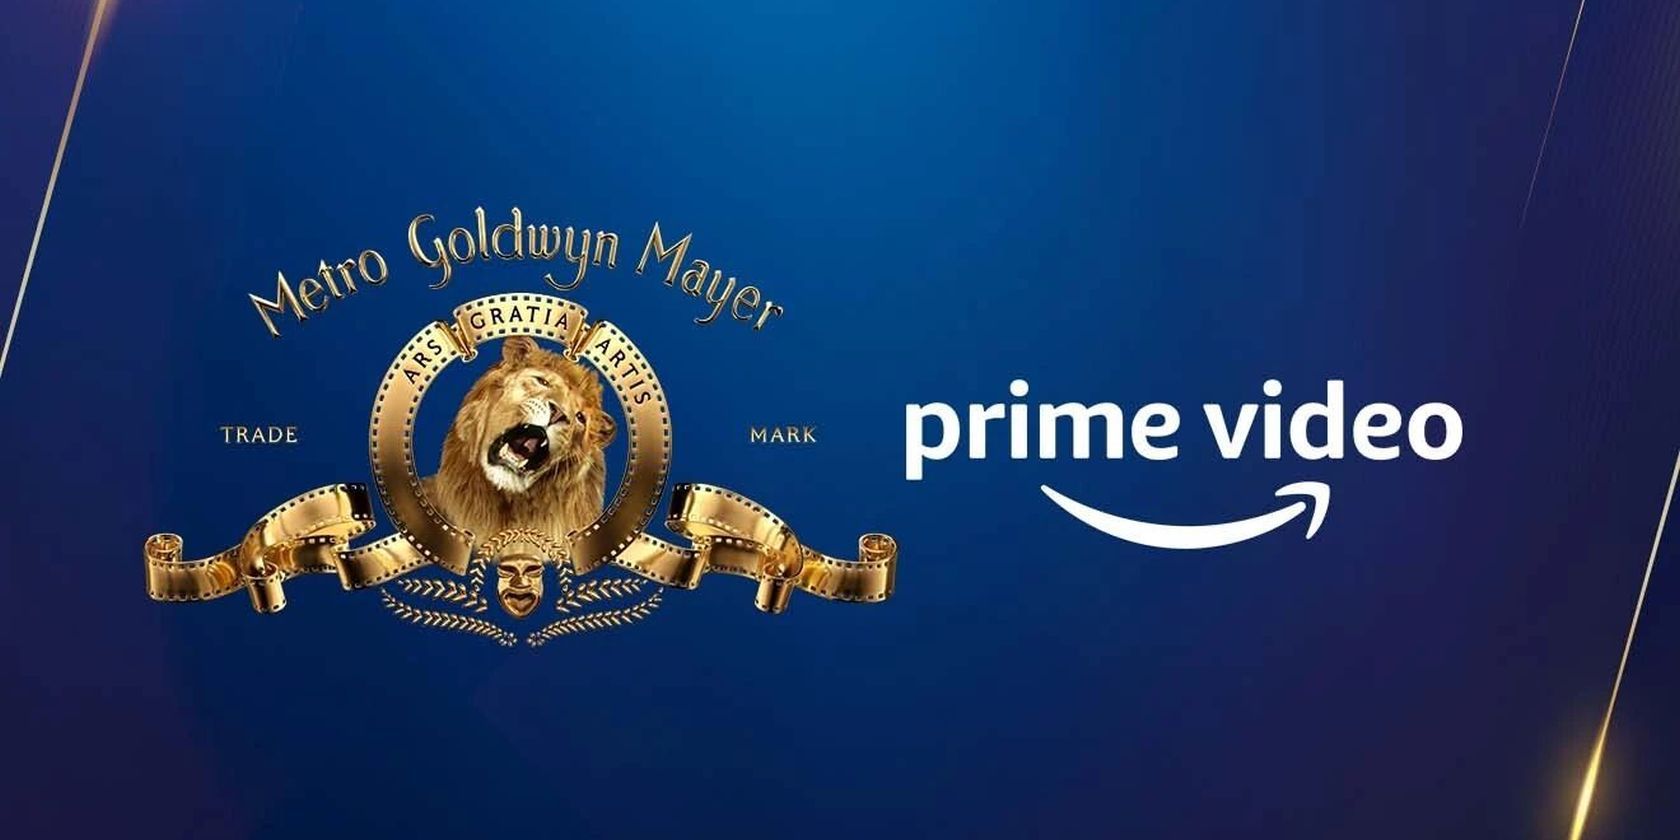 Amazon Prime Video and MGM